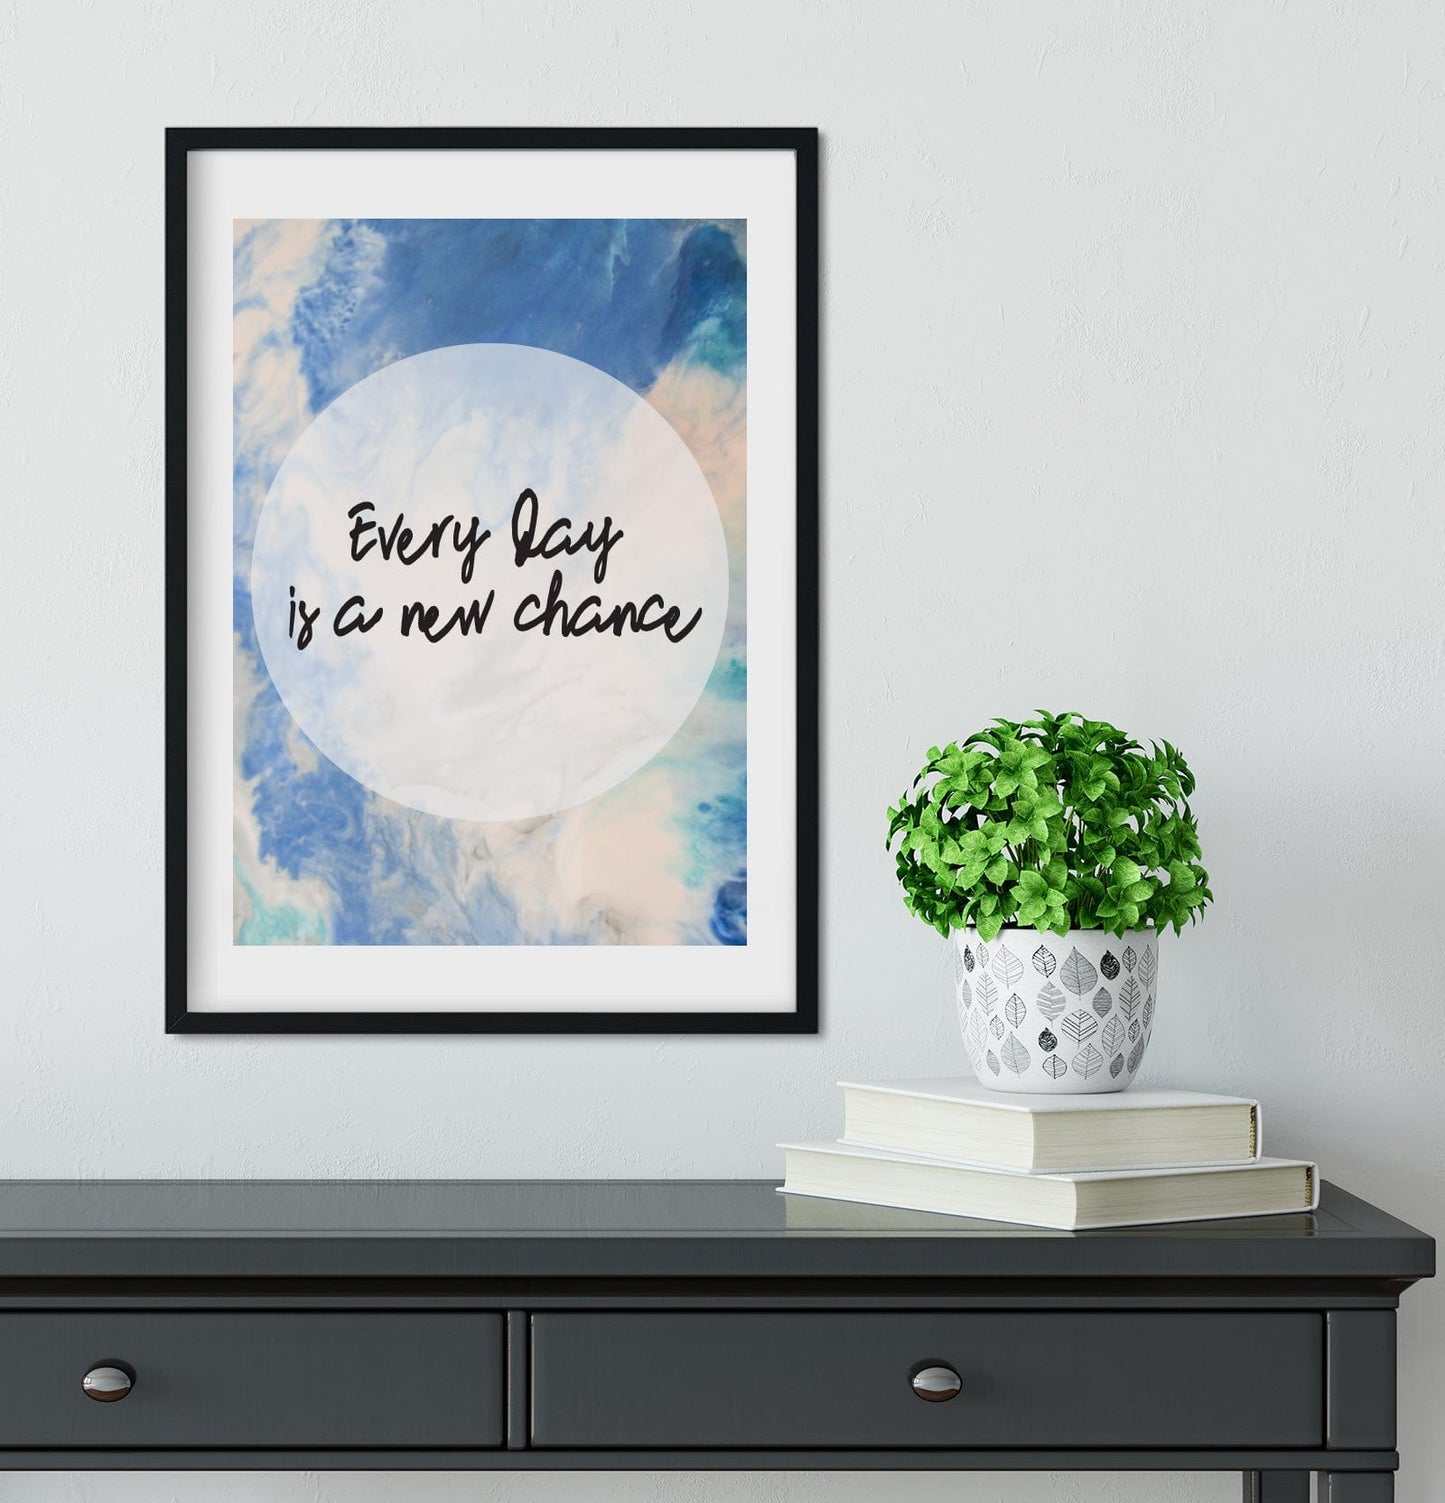 Every day is a new chance inspirational quote print quote prints